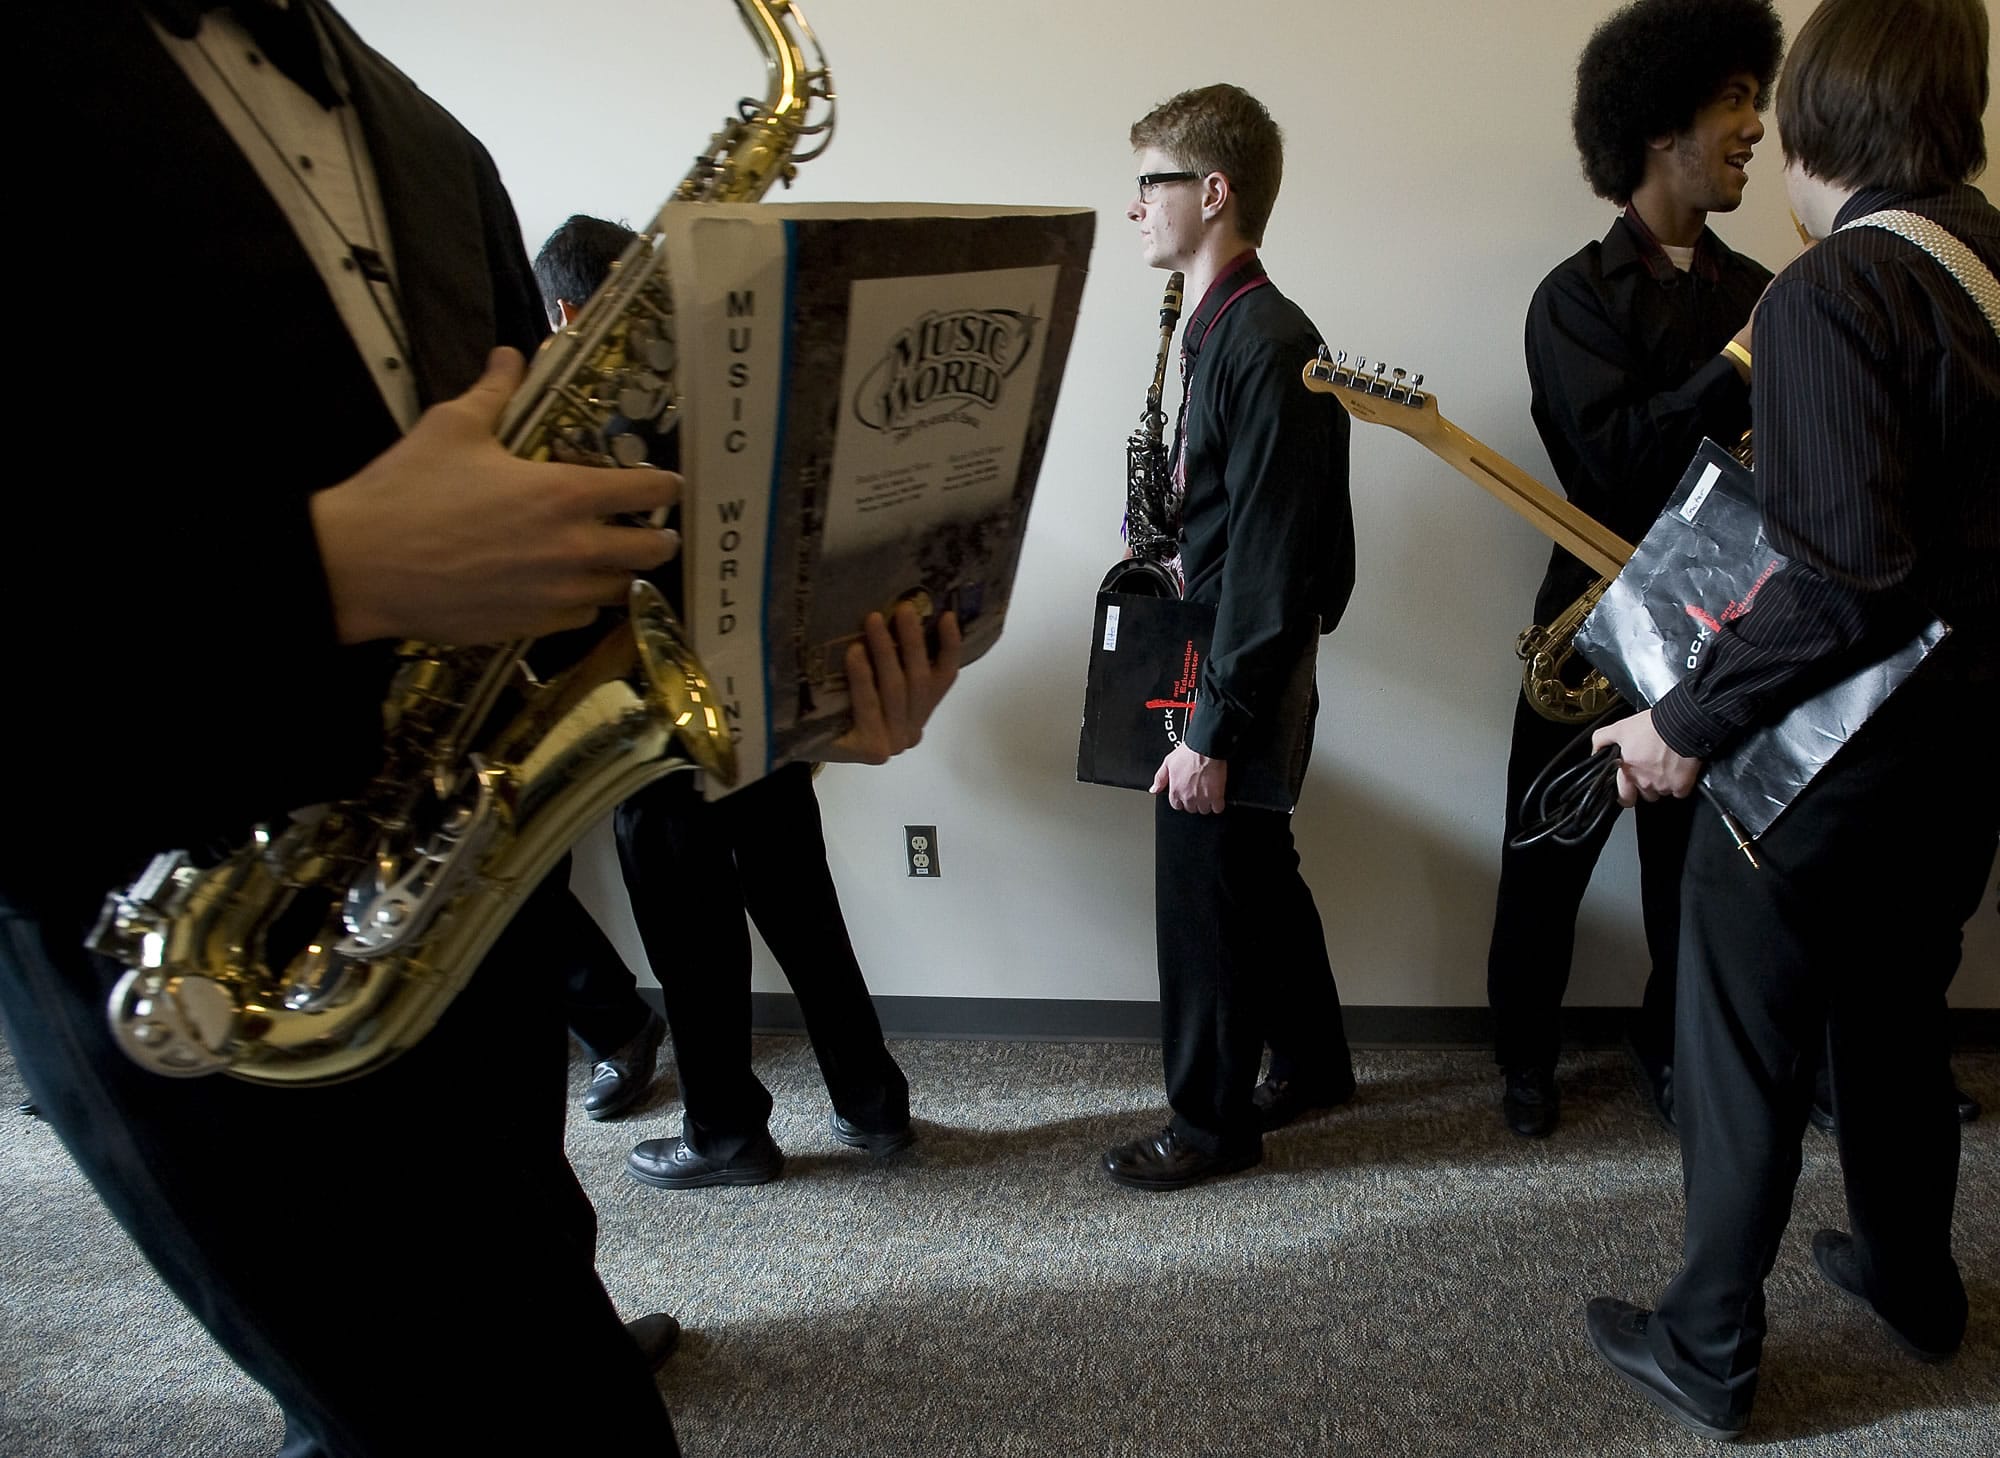 The 51st annual Clark College Jazz Festival runs 8 a.m. to 5 p.m. with preliminary competitions, with the finals starting at 7 p.m.